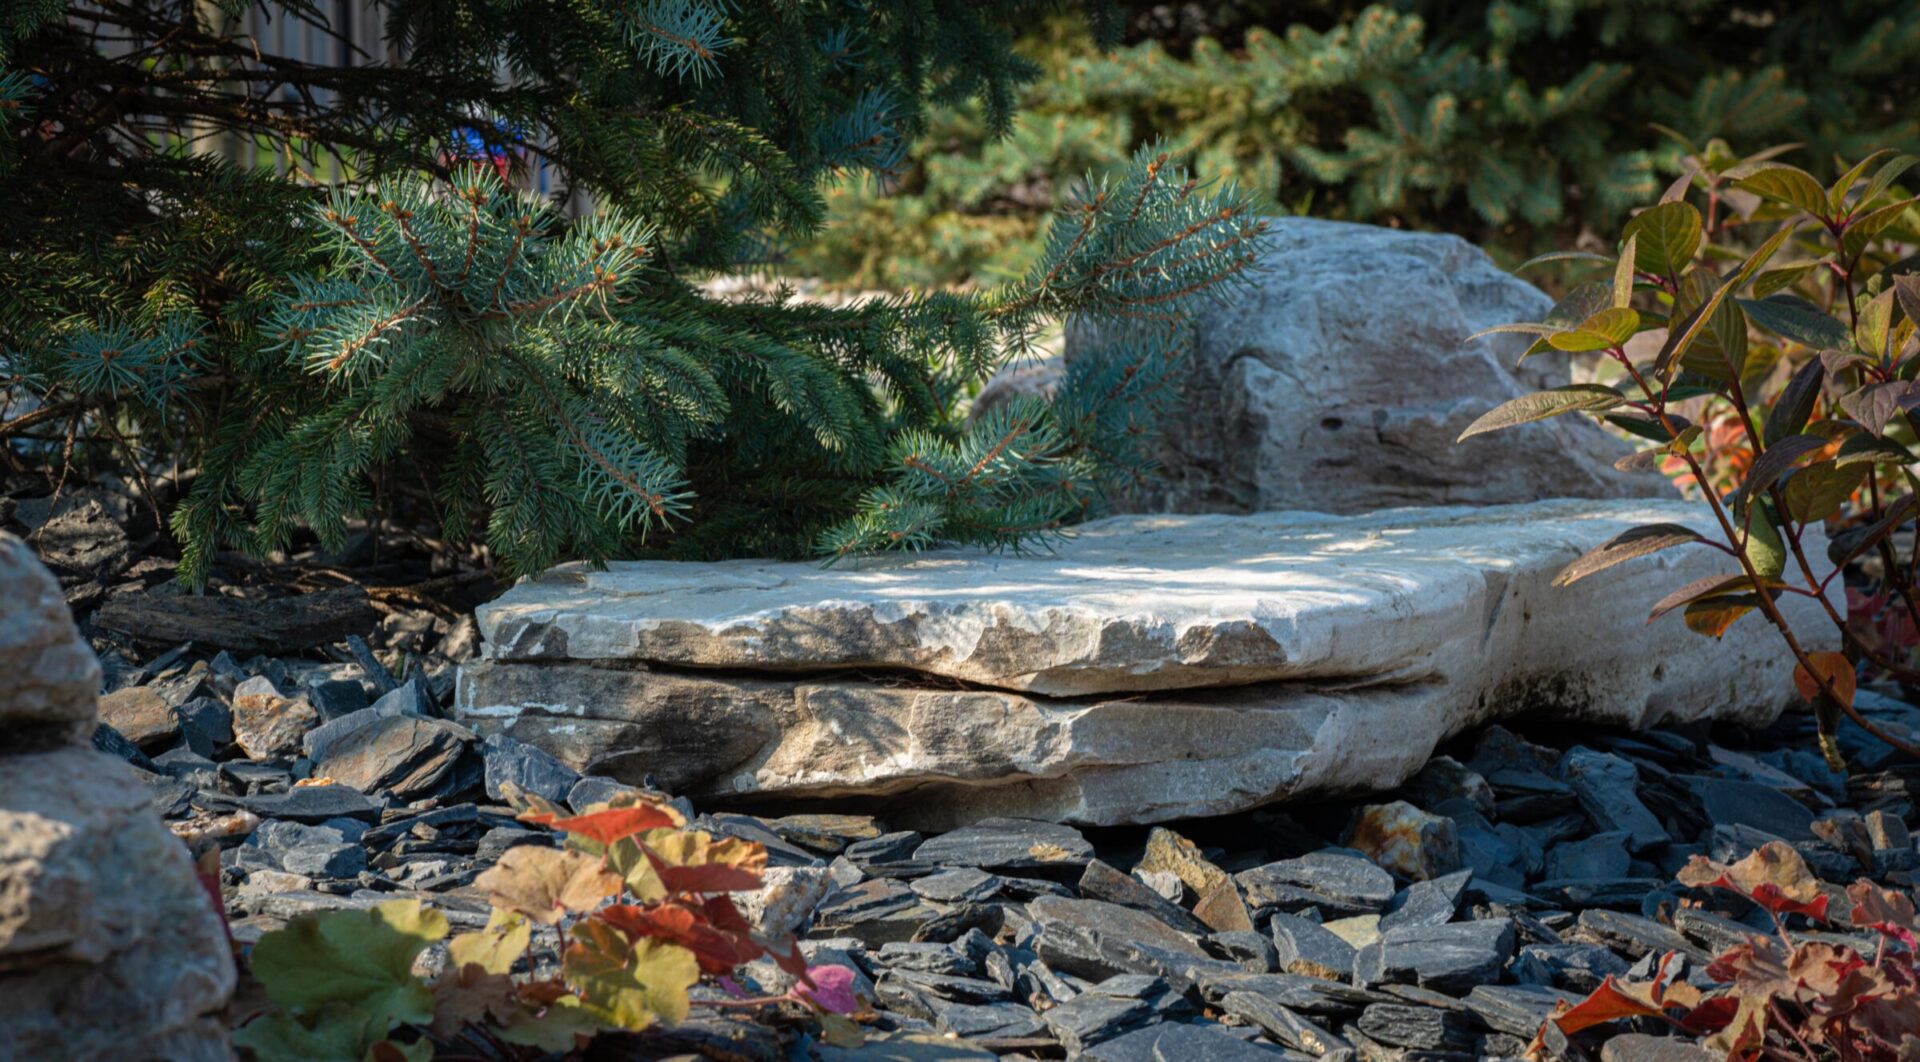 A serene garden scene with large flat stones and shards of slate surrounded by evergreens and plants with colorful autumn leaves. Peaceful, natural outdoor setting.